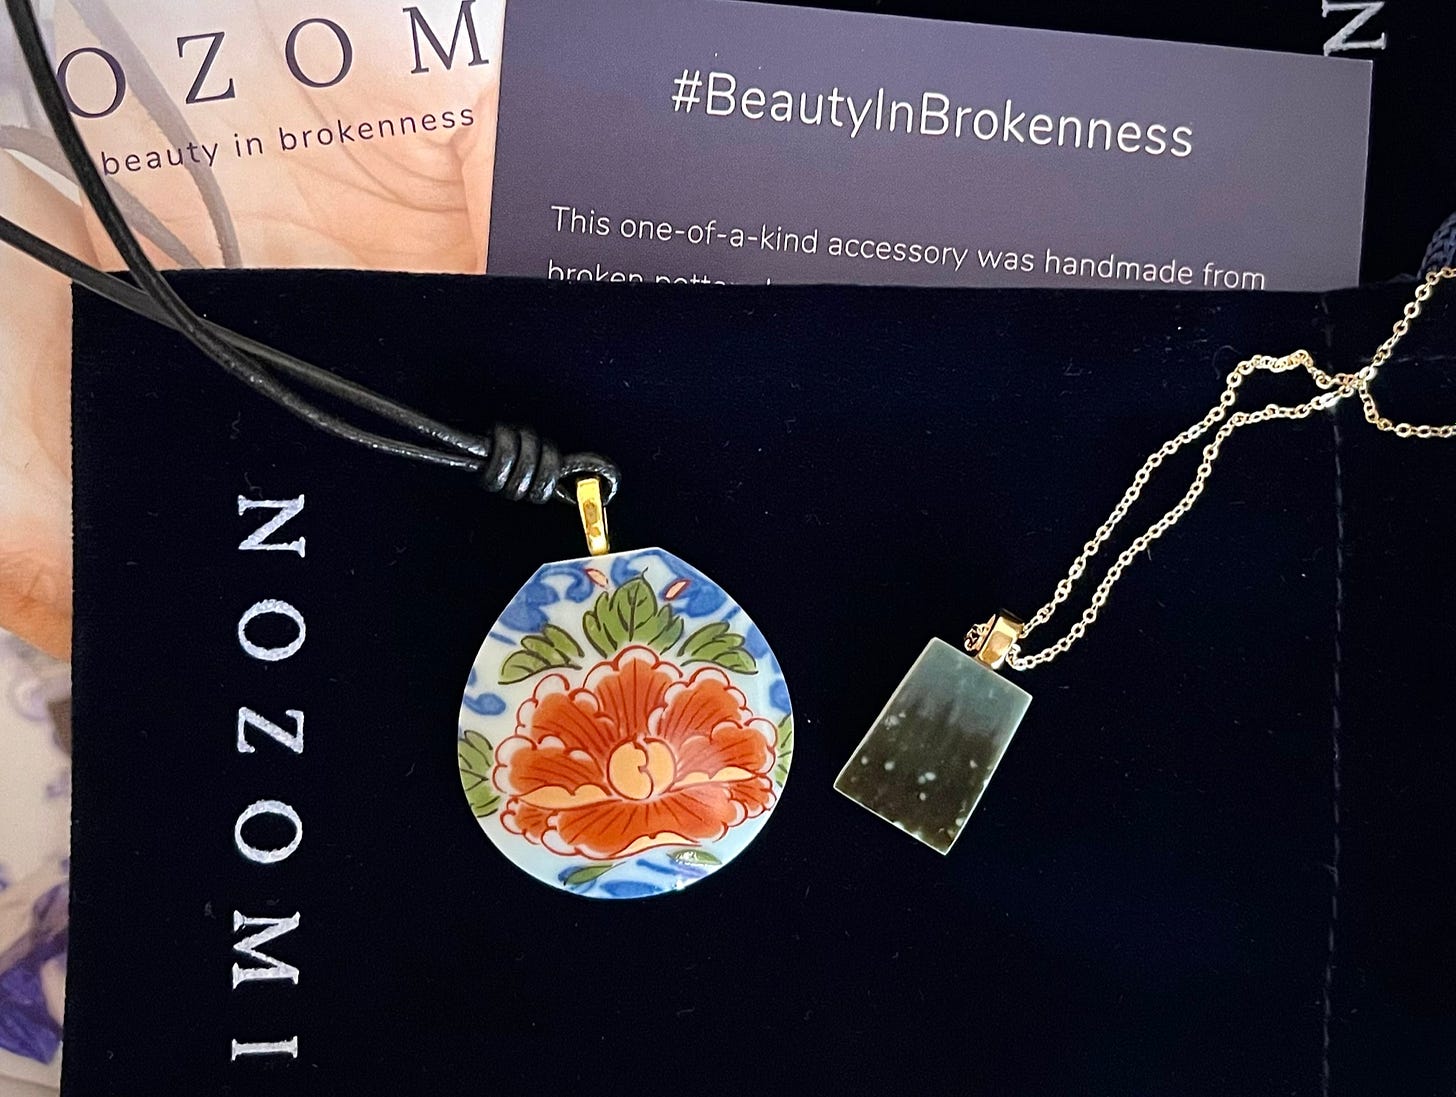 Two pendant necklaces, one featuring a floral design and the other in shades of dark gray, with Nozomi Project ephemera behind them.